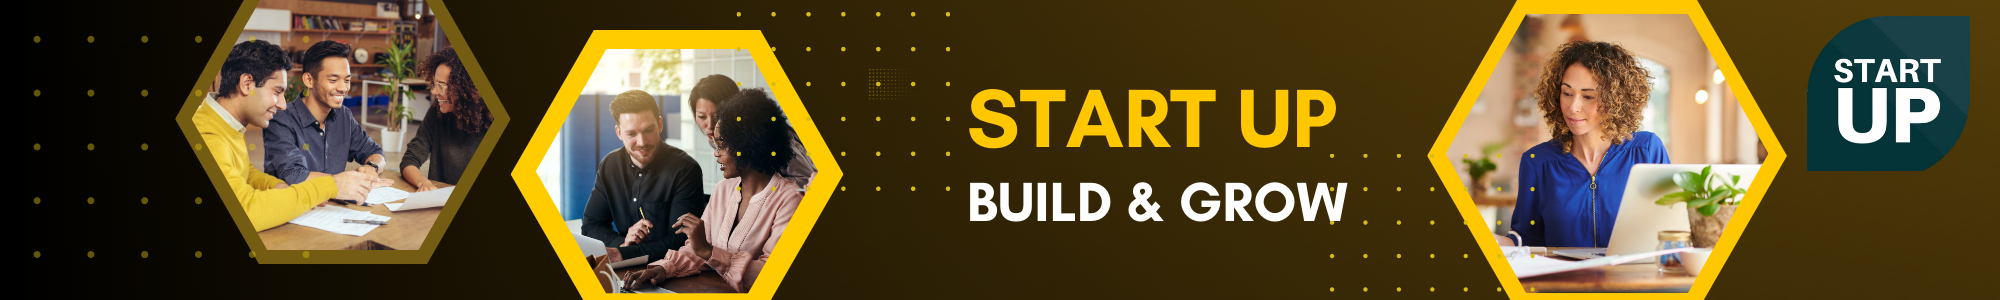 Start Up Banner (2000 × 300 px).png